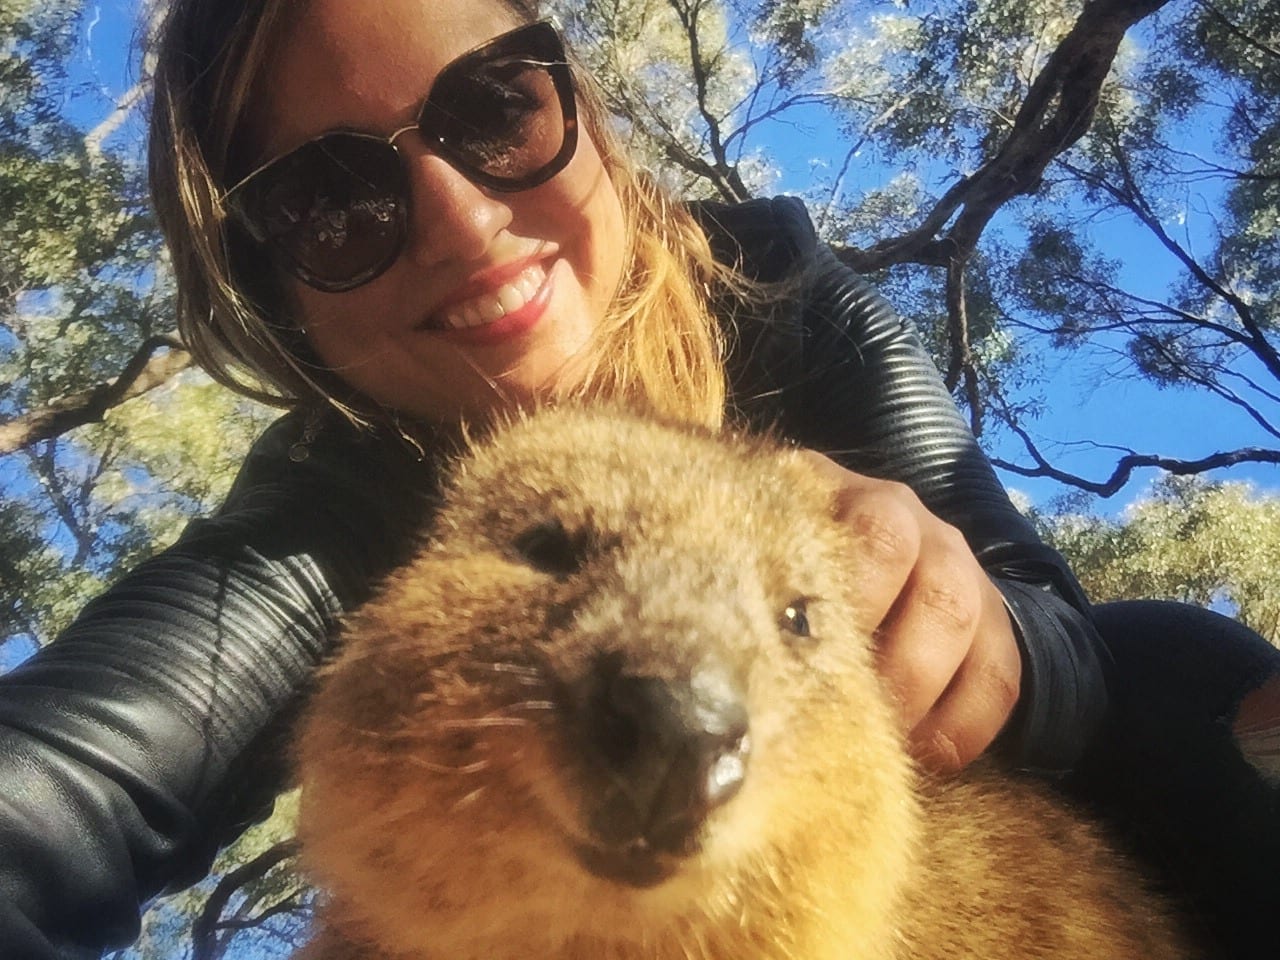 Kate and a Quokka